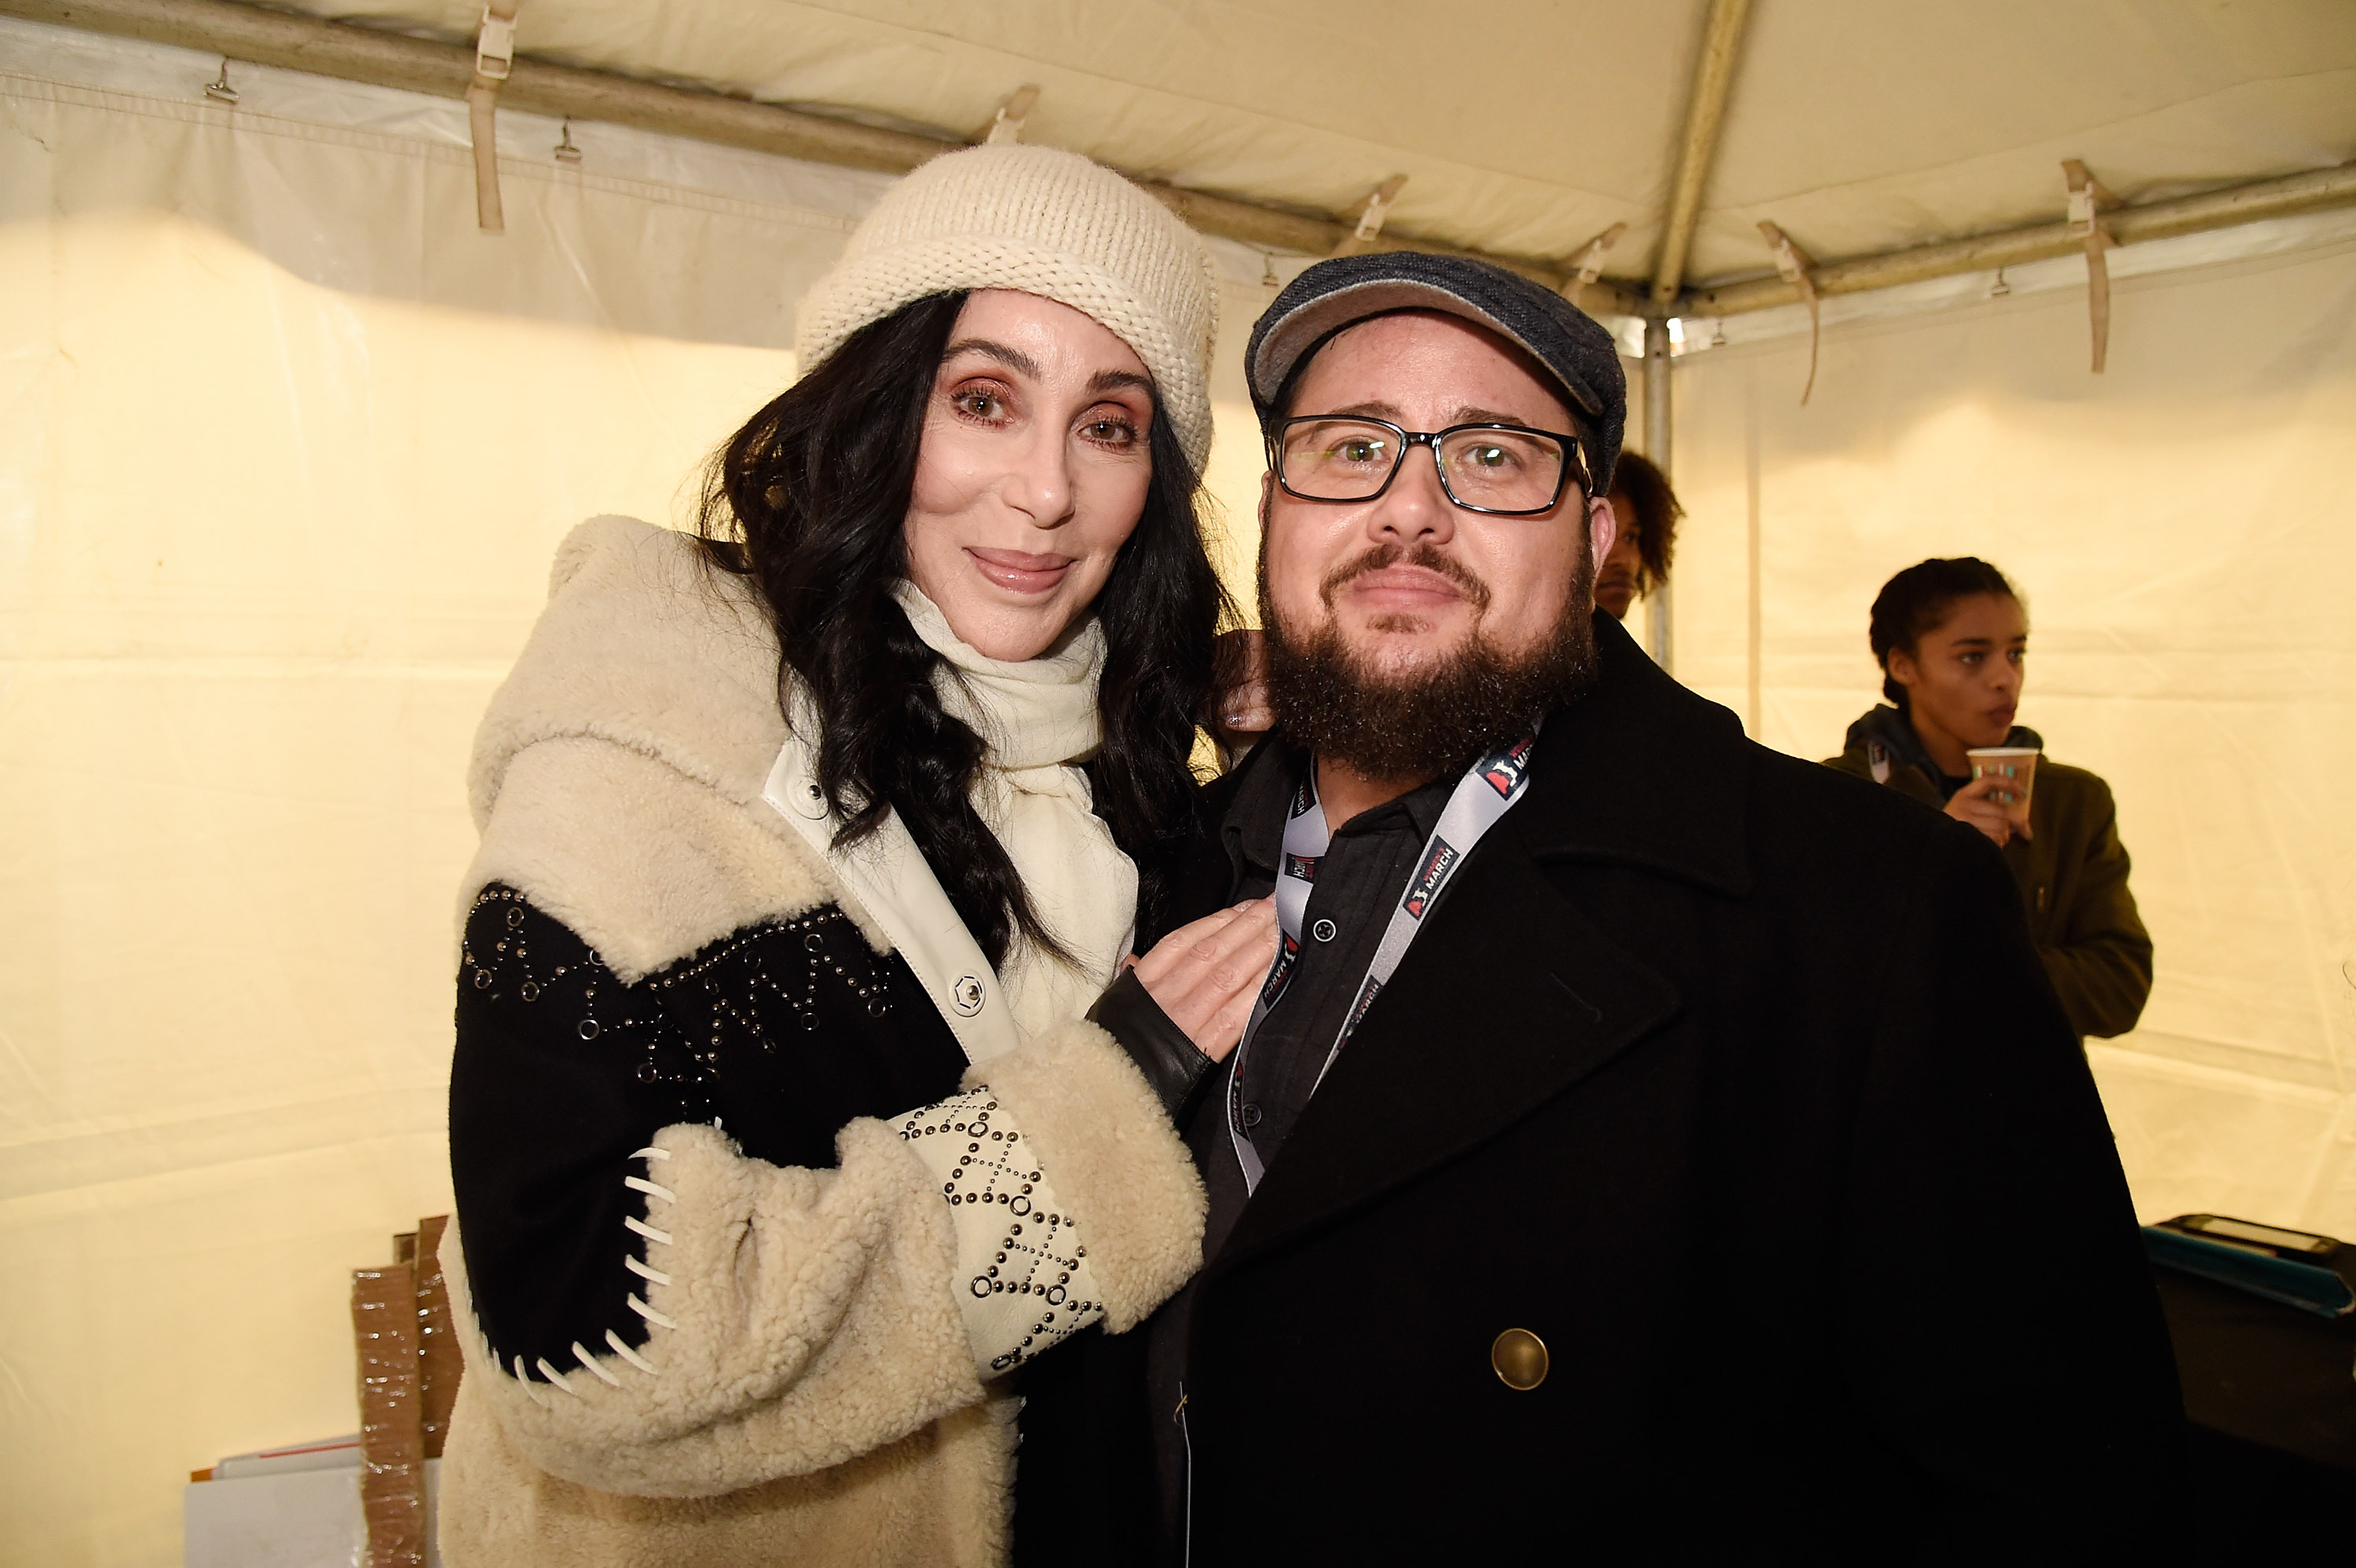 Cher and Chaz Bono attend the rally at the Women's March on Washington in Washington, DC, on January 21, 2017. | Source: Getty Images